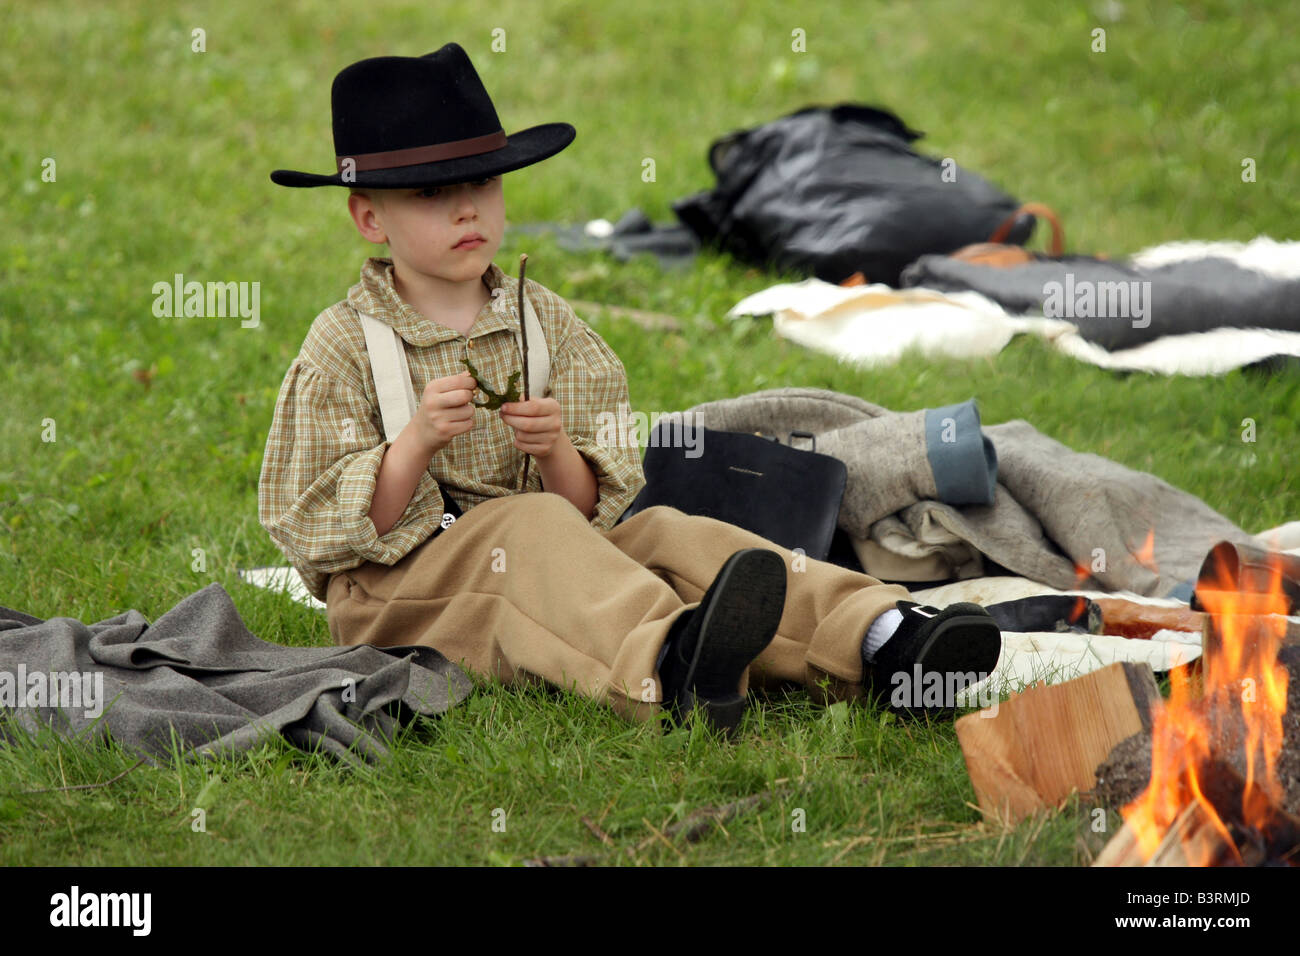 A boy in an 1850s outfit playing with a leaf by a campfire at a Civil War Encampment Reenactment Stock Photo